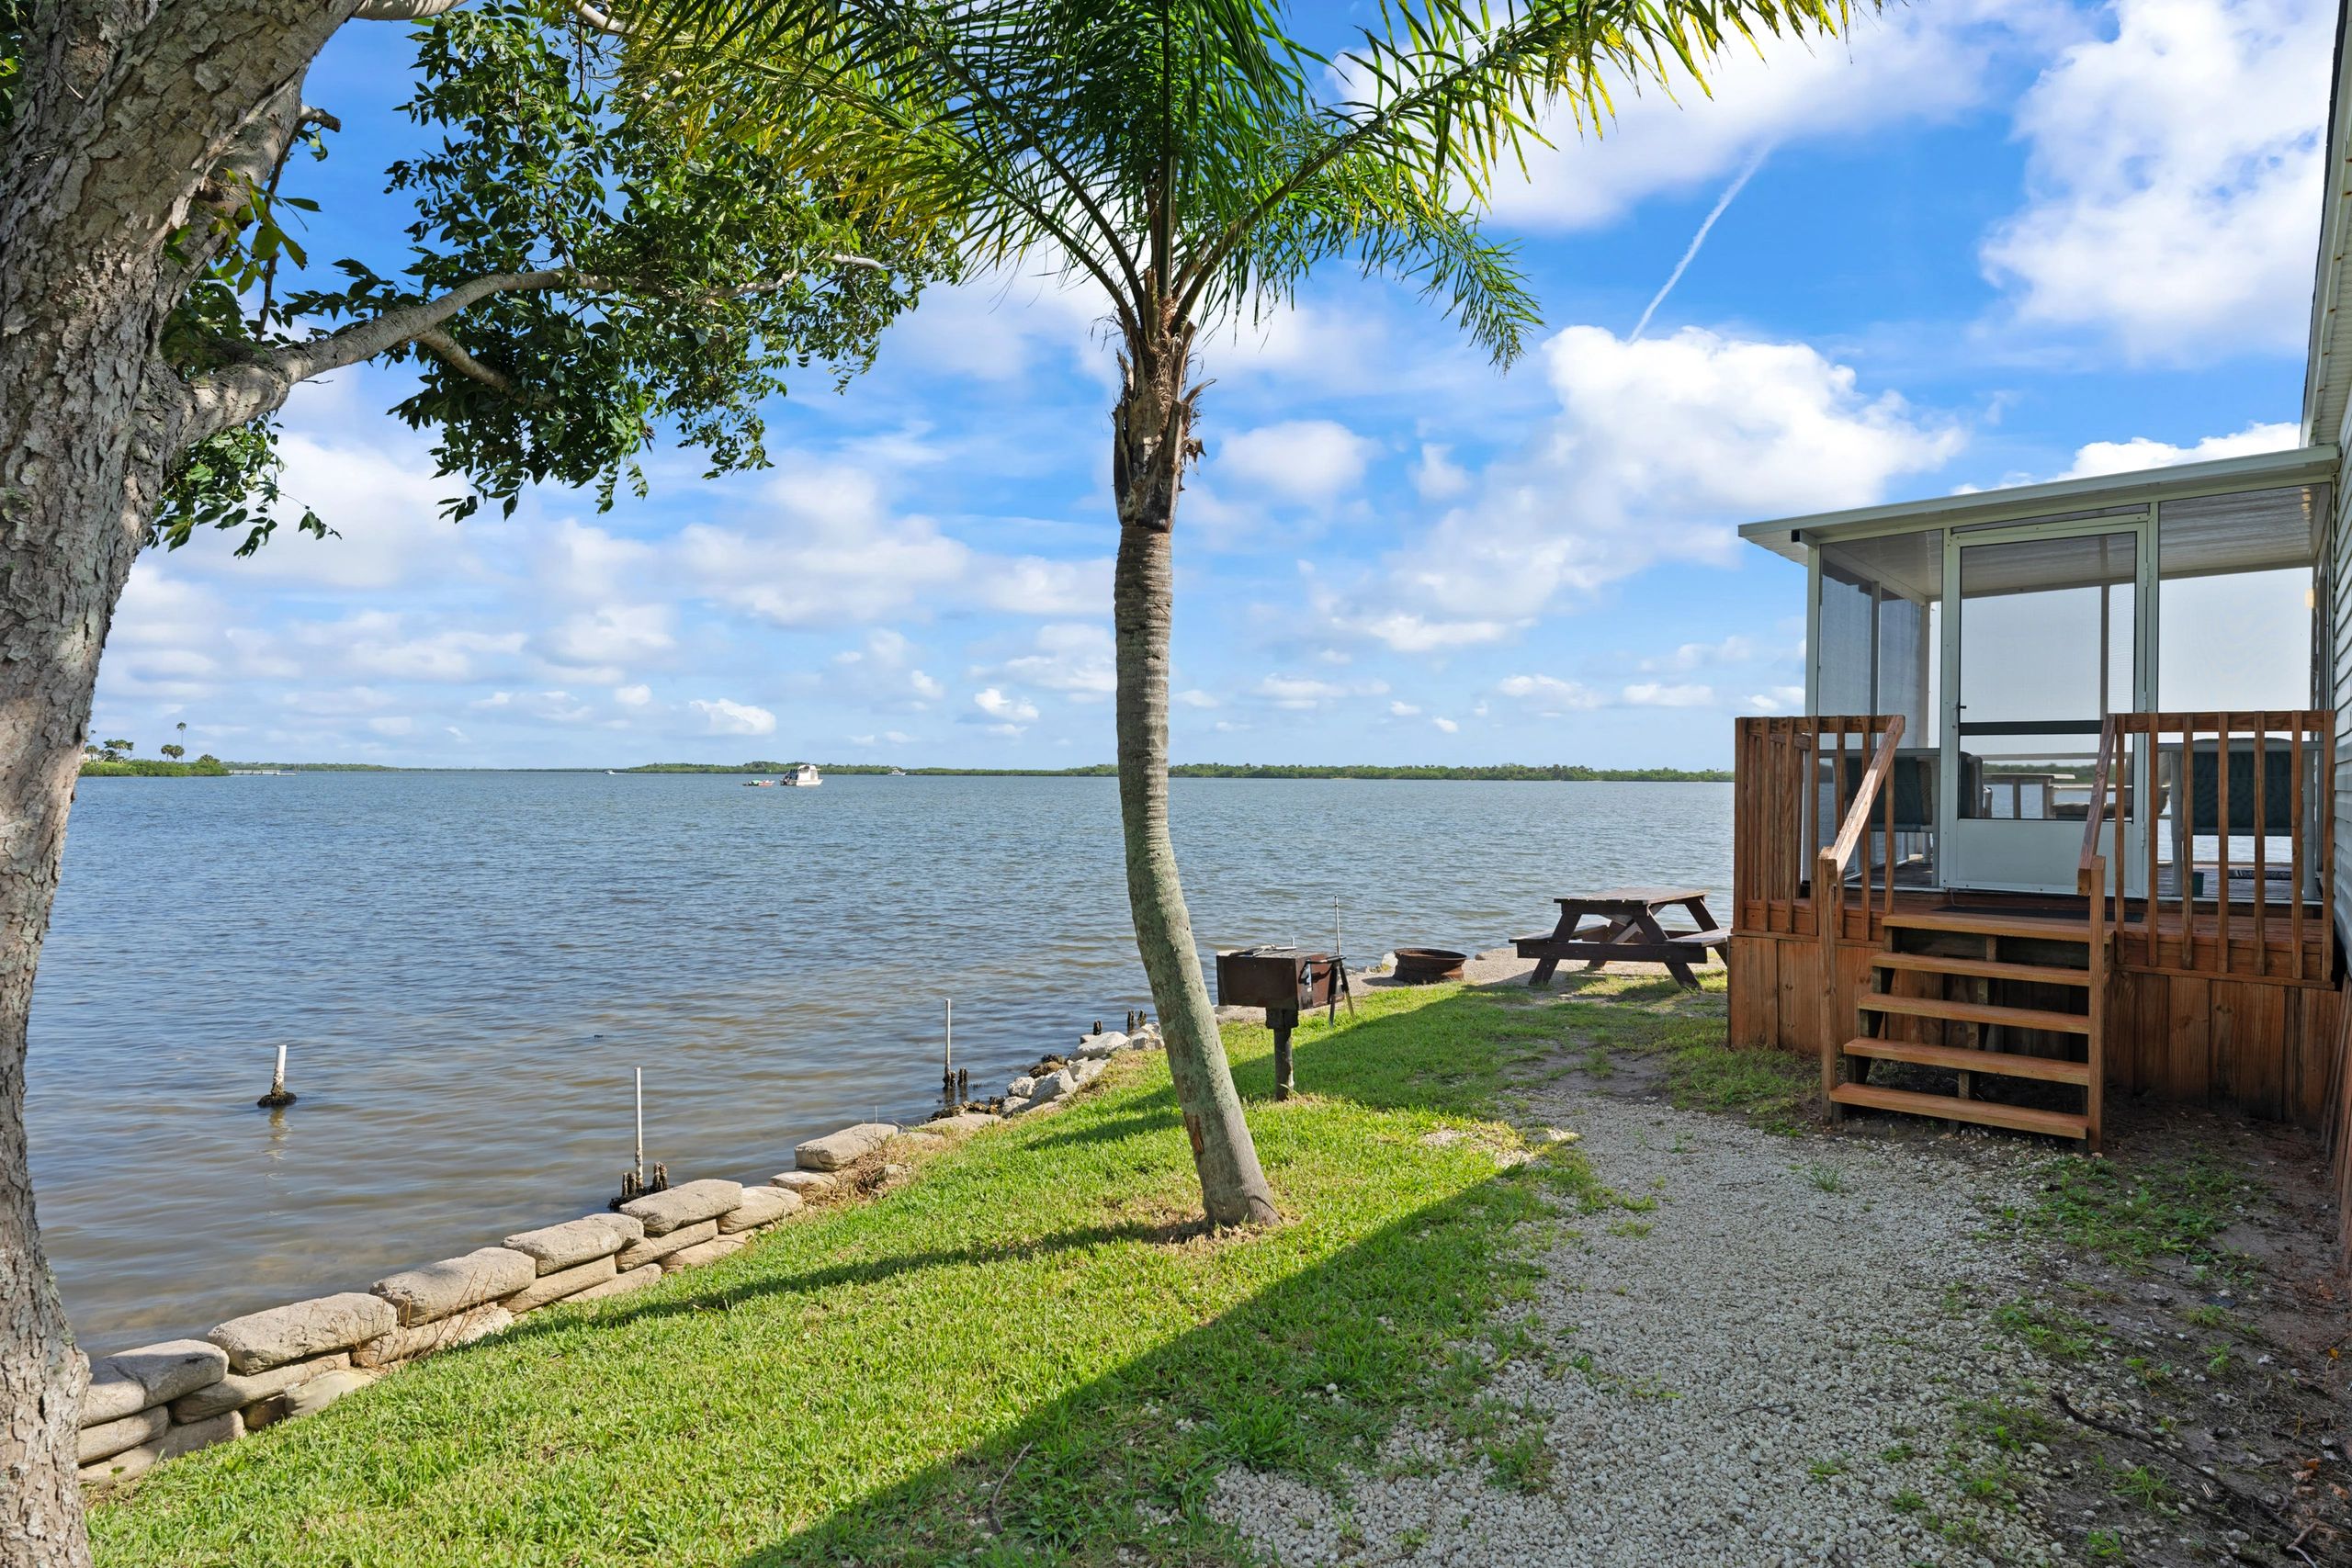 Red Fish cabin screened porch with veiws of Mosquito Lagoon & Intracoastal waterway